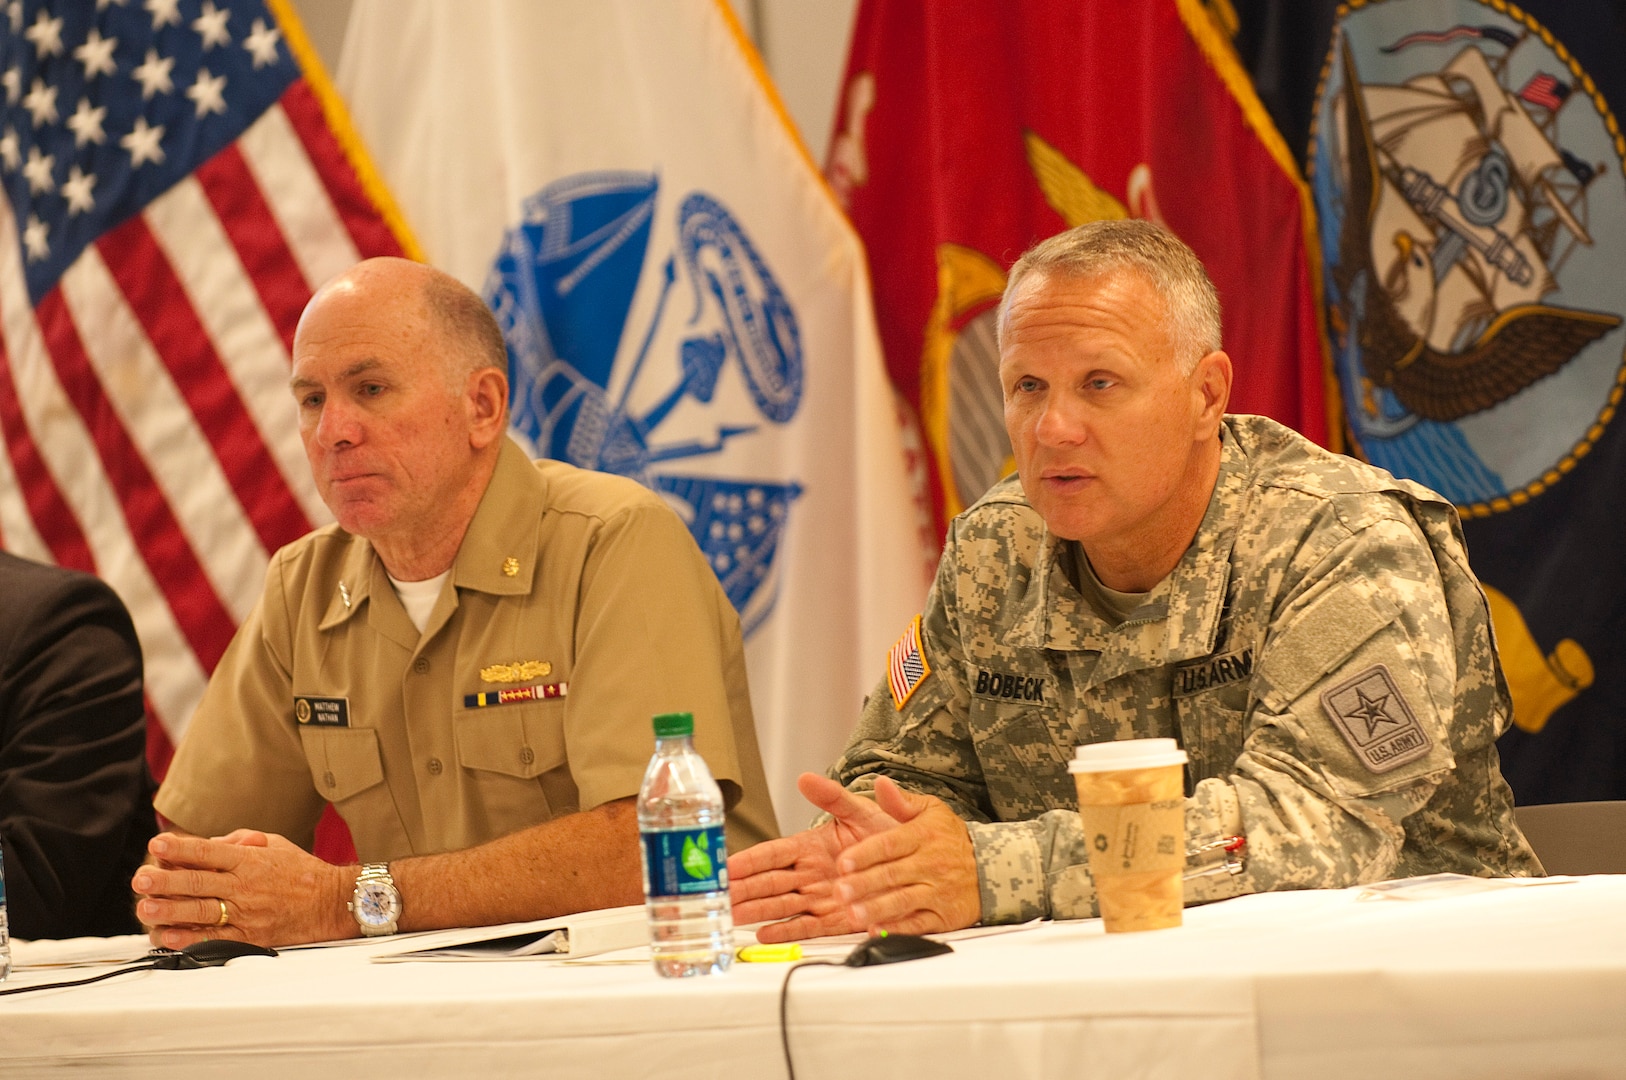 Army Brig. Gen. Michael Bobeck, right, special assistant to the director of the Army National Guard, along with Navy Vice Adm. Matthew Nathan, left, surgeon general of the Navy, speaks during a panel discussion about the mental health challenges facing the Army Guard during a Psychological Health and Resiliance Summit, Sept. 18, 2014 in Falls Church,Va. The Defense Centers for Excellence for Psychological Health and Traumatic Brain Injury spearheaded the summit, which allowed leaders from across the Department Of Defense to discuss the way ahead for addressing psychological health issues and resilience across the force. (Army National Guard photo by Staff Sgt. Darron Salzer, National Guard Bureau)(Released)